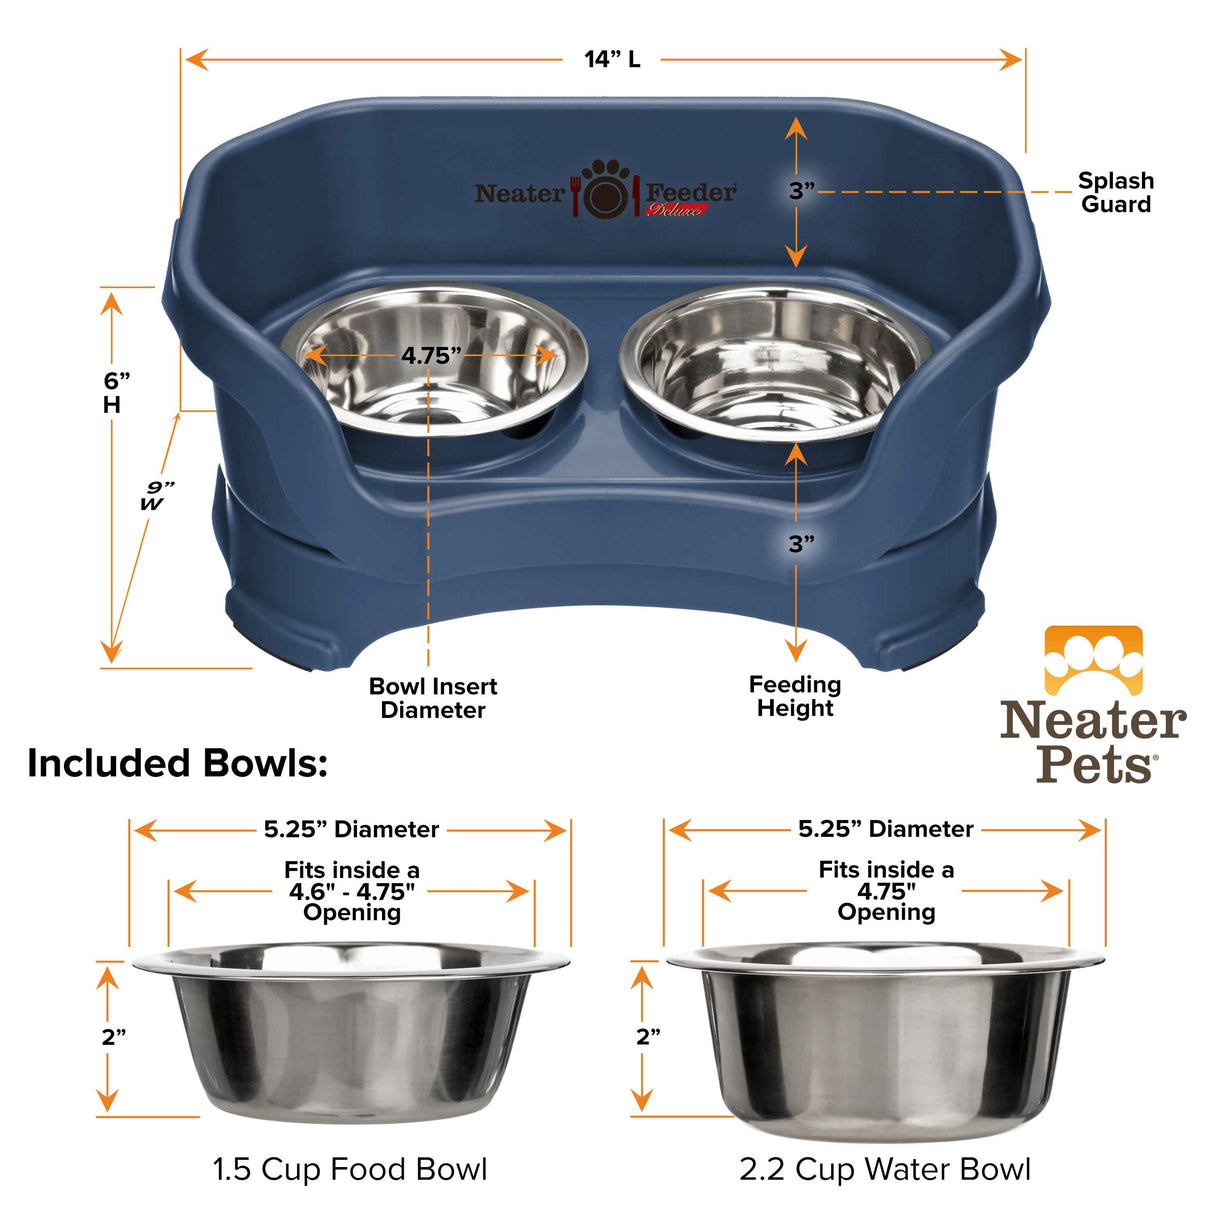 Deluxe Dark Blue Small Dog Neater Feeder and Bowl dimensions